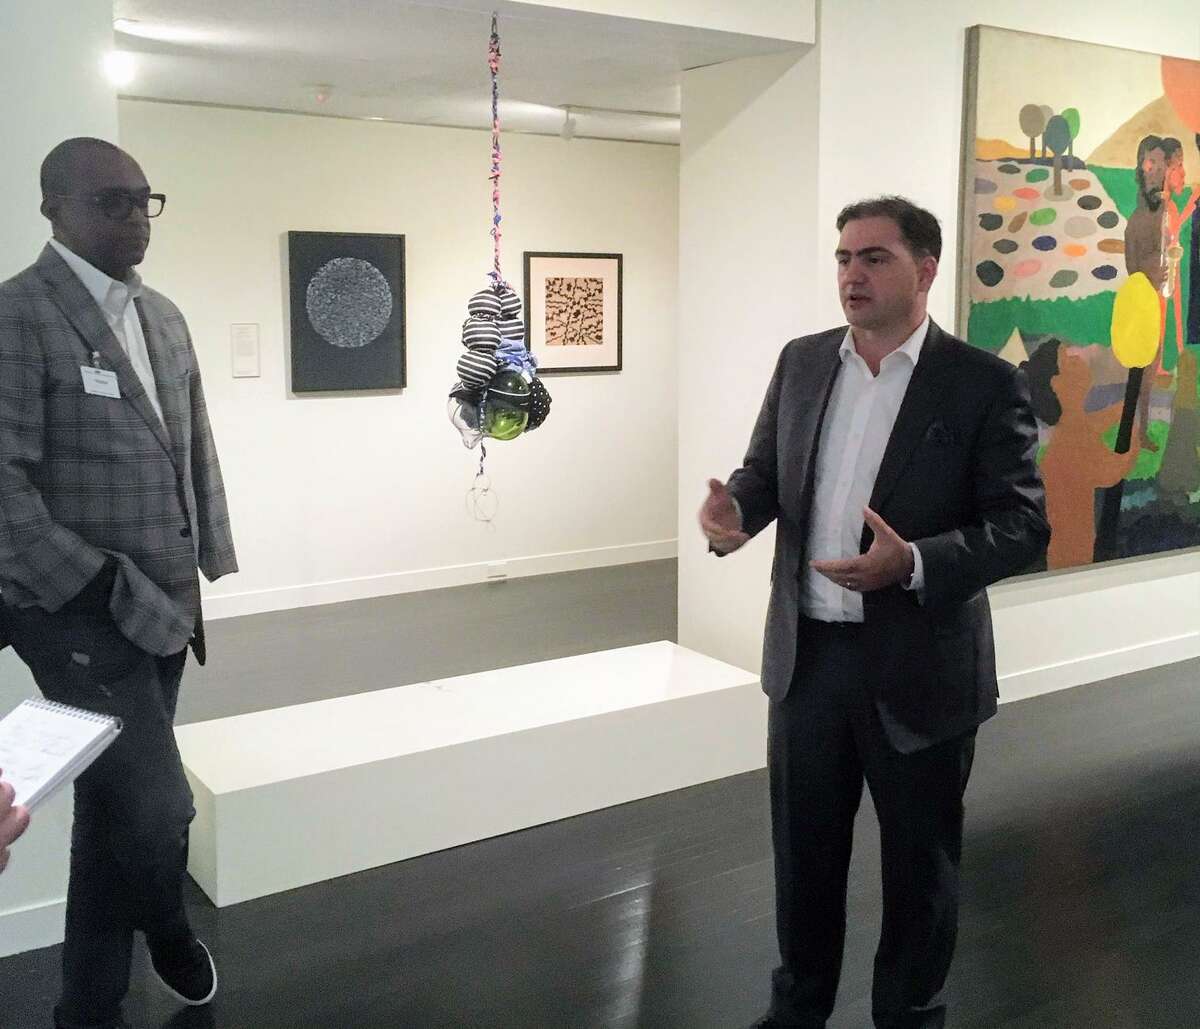 Atheneum Director Thomas Loughman, right, talks about the new exhibit at a preview as curator and artist Berrisford Boothe of the Petrucci Family Foundation looks on.